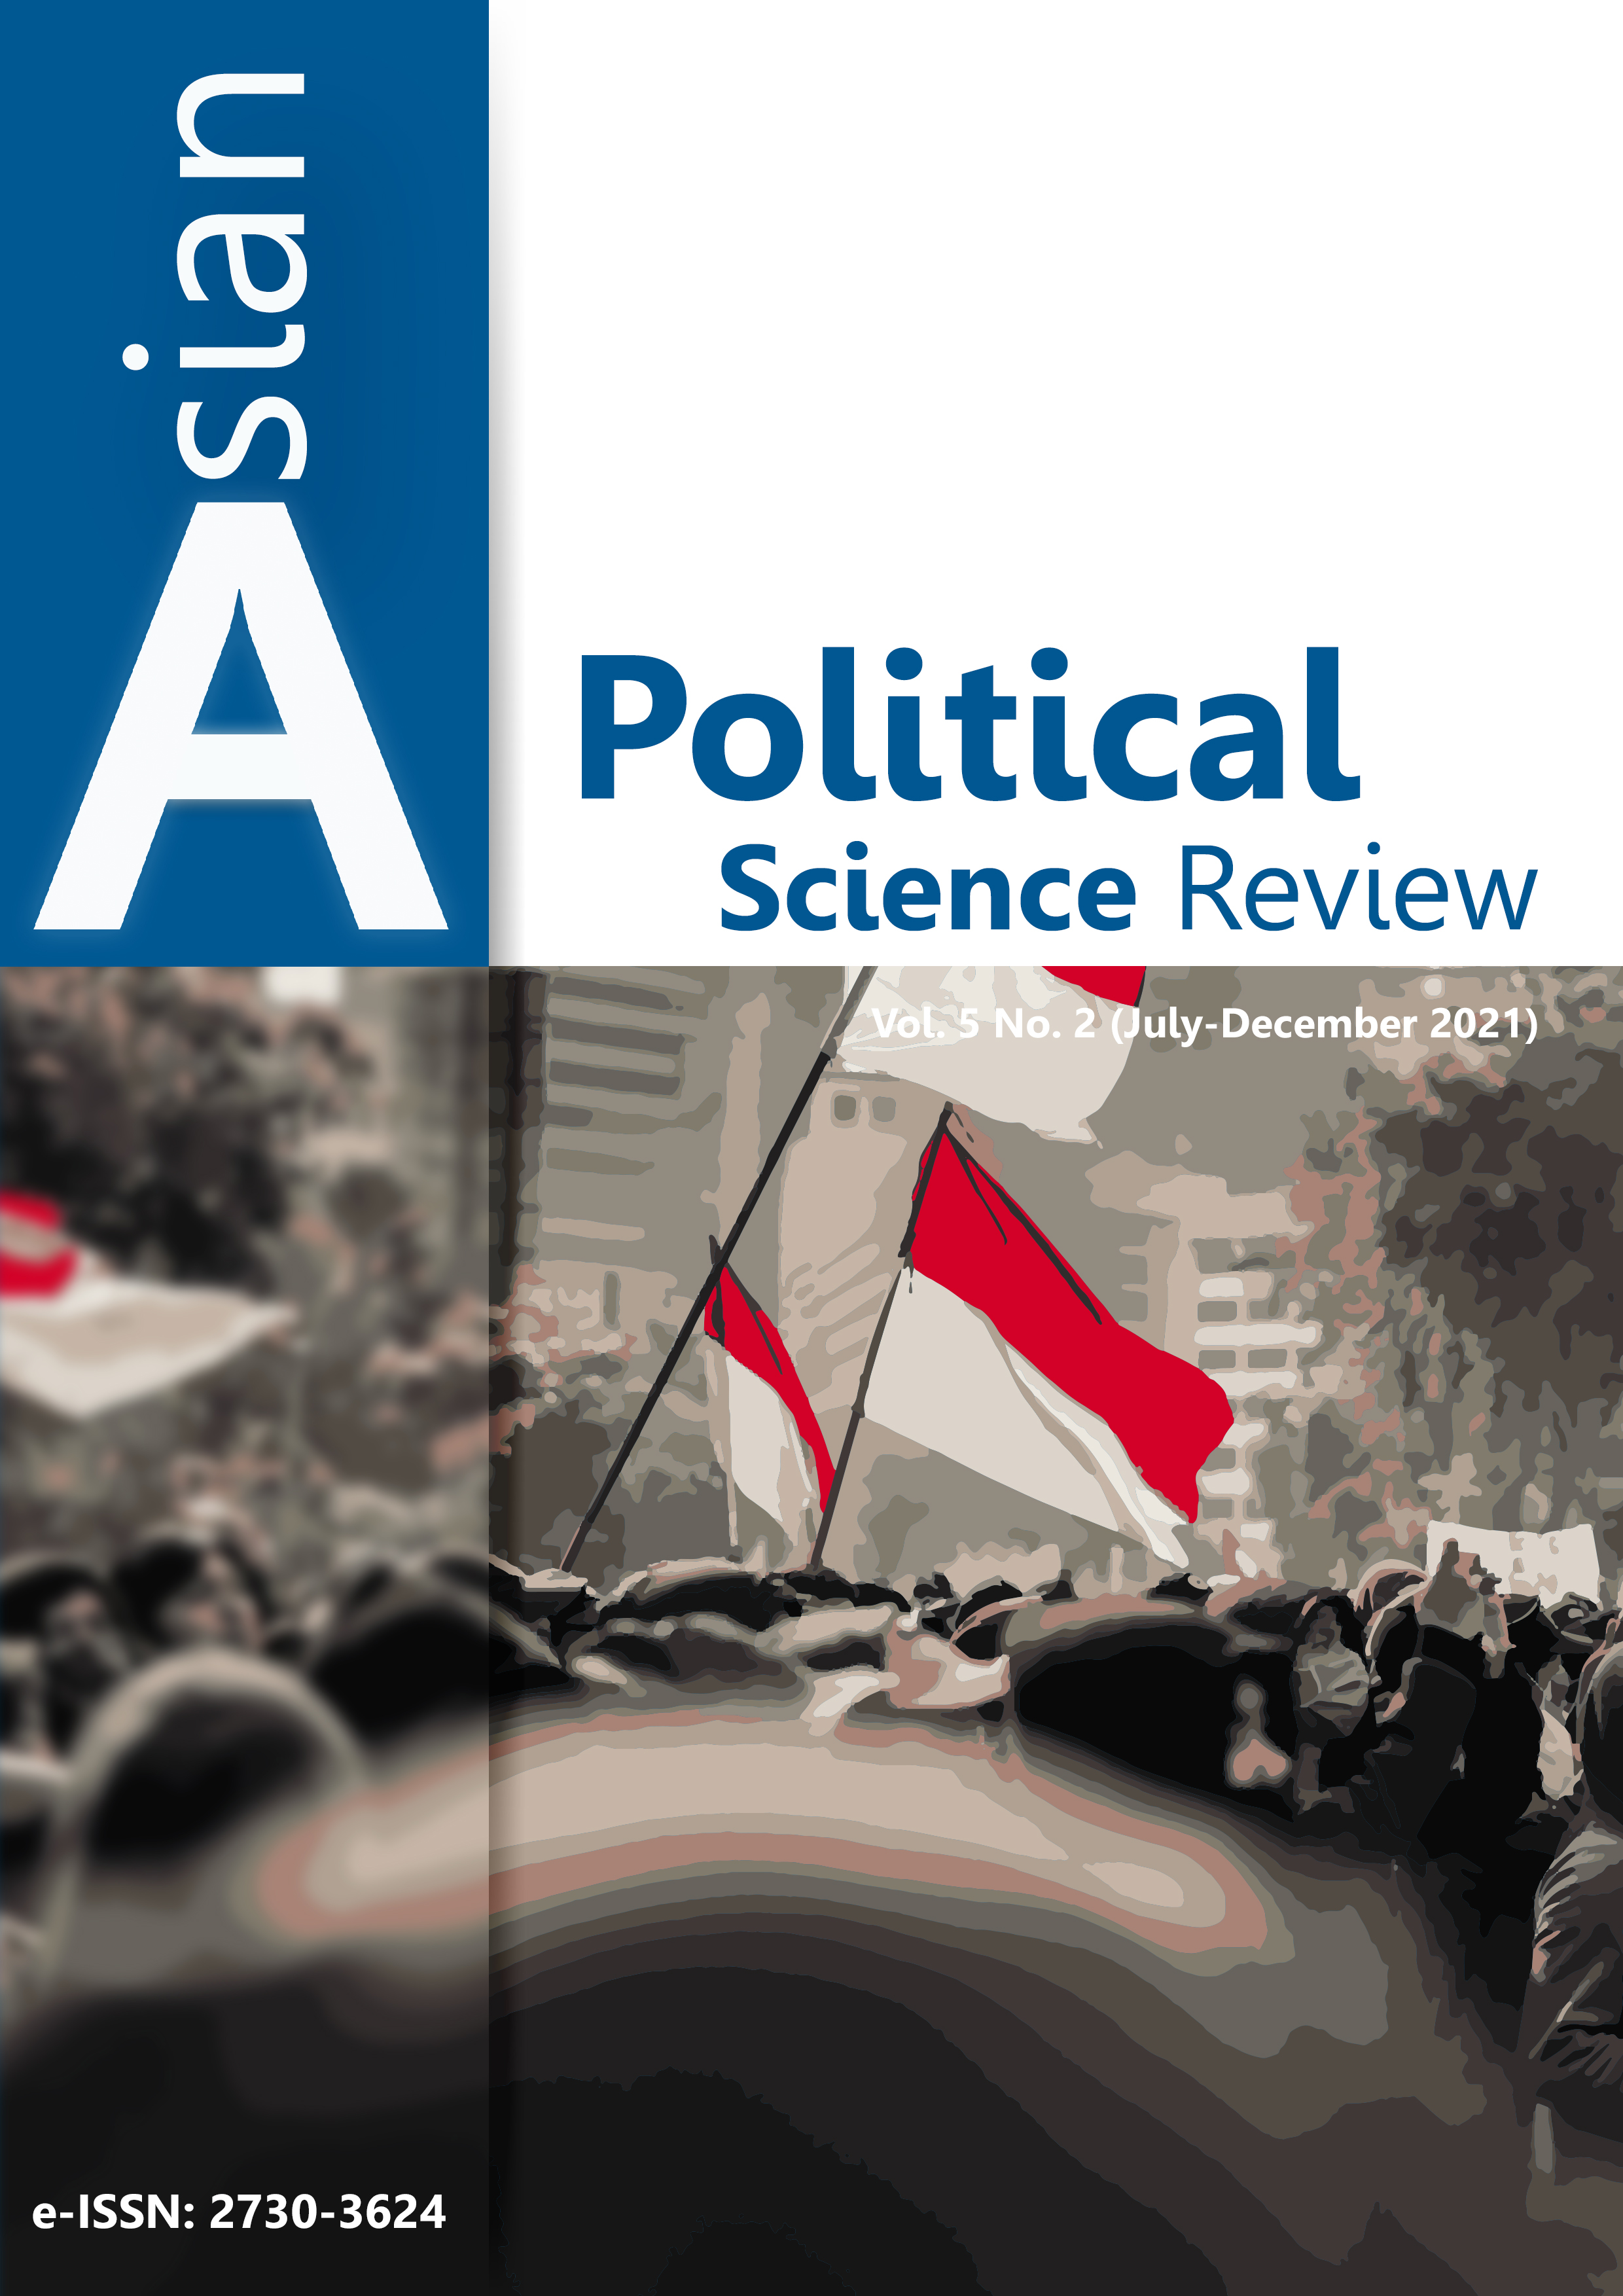 					View Vol. 5 No. 2 (2021): Asian Political Science Review
				